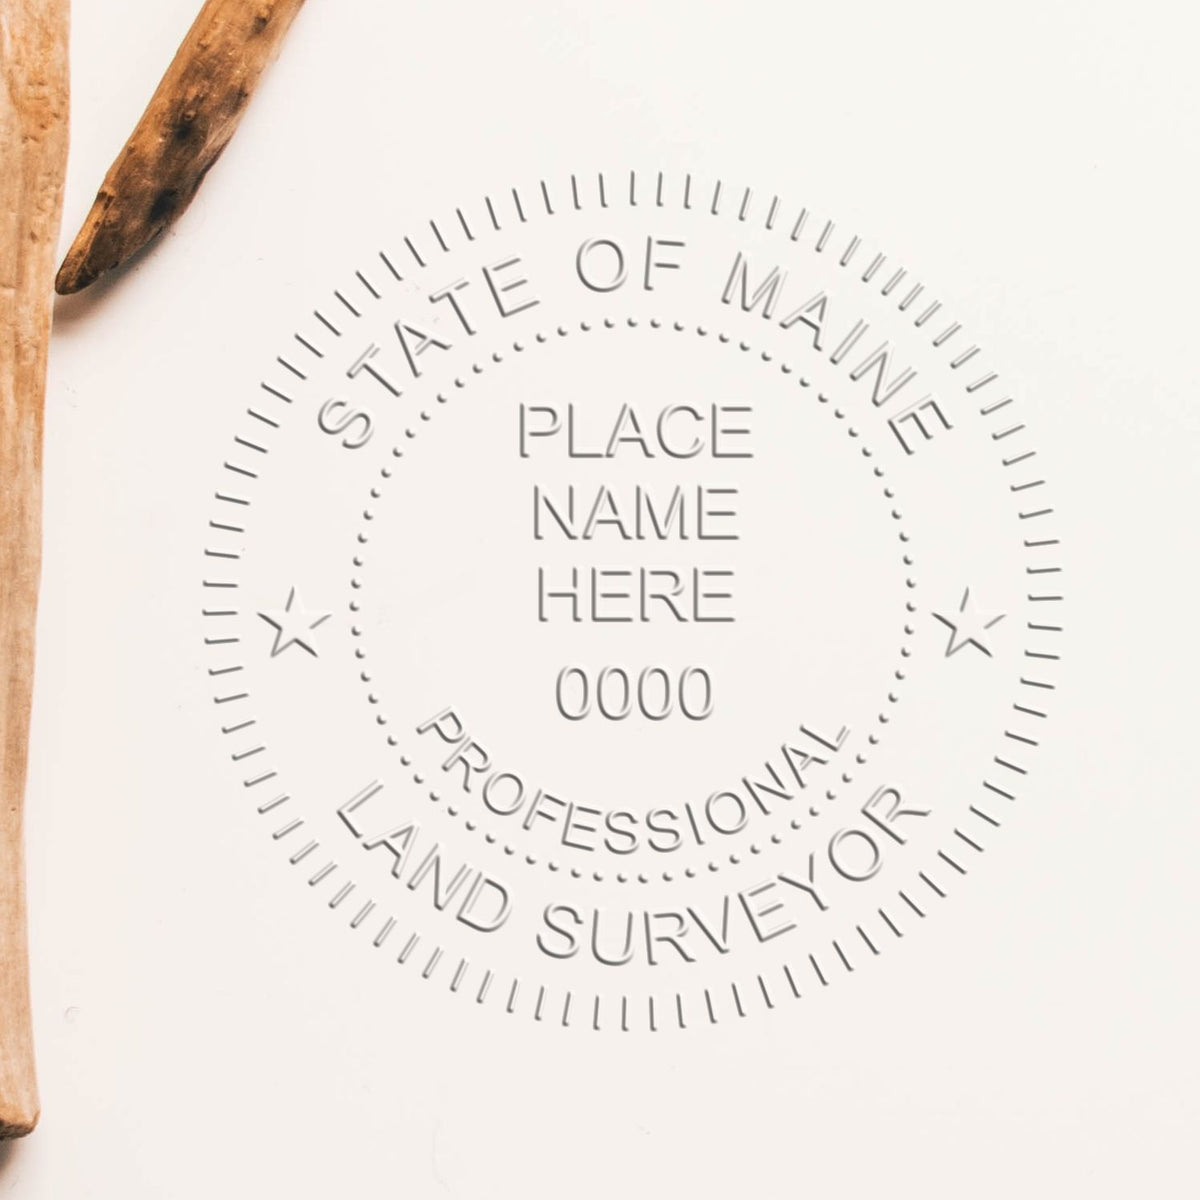 A stamped impression of the Handheld Maine Land Surveyor Seal in this stylish lifestyle photo, setting the tone for a unique and personalized product.